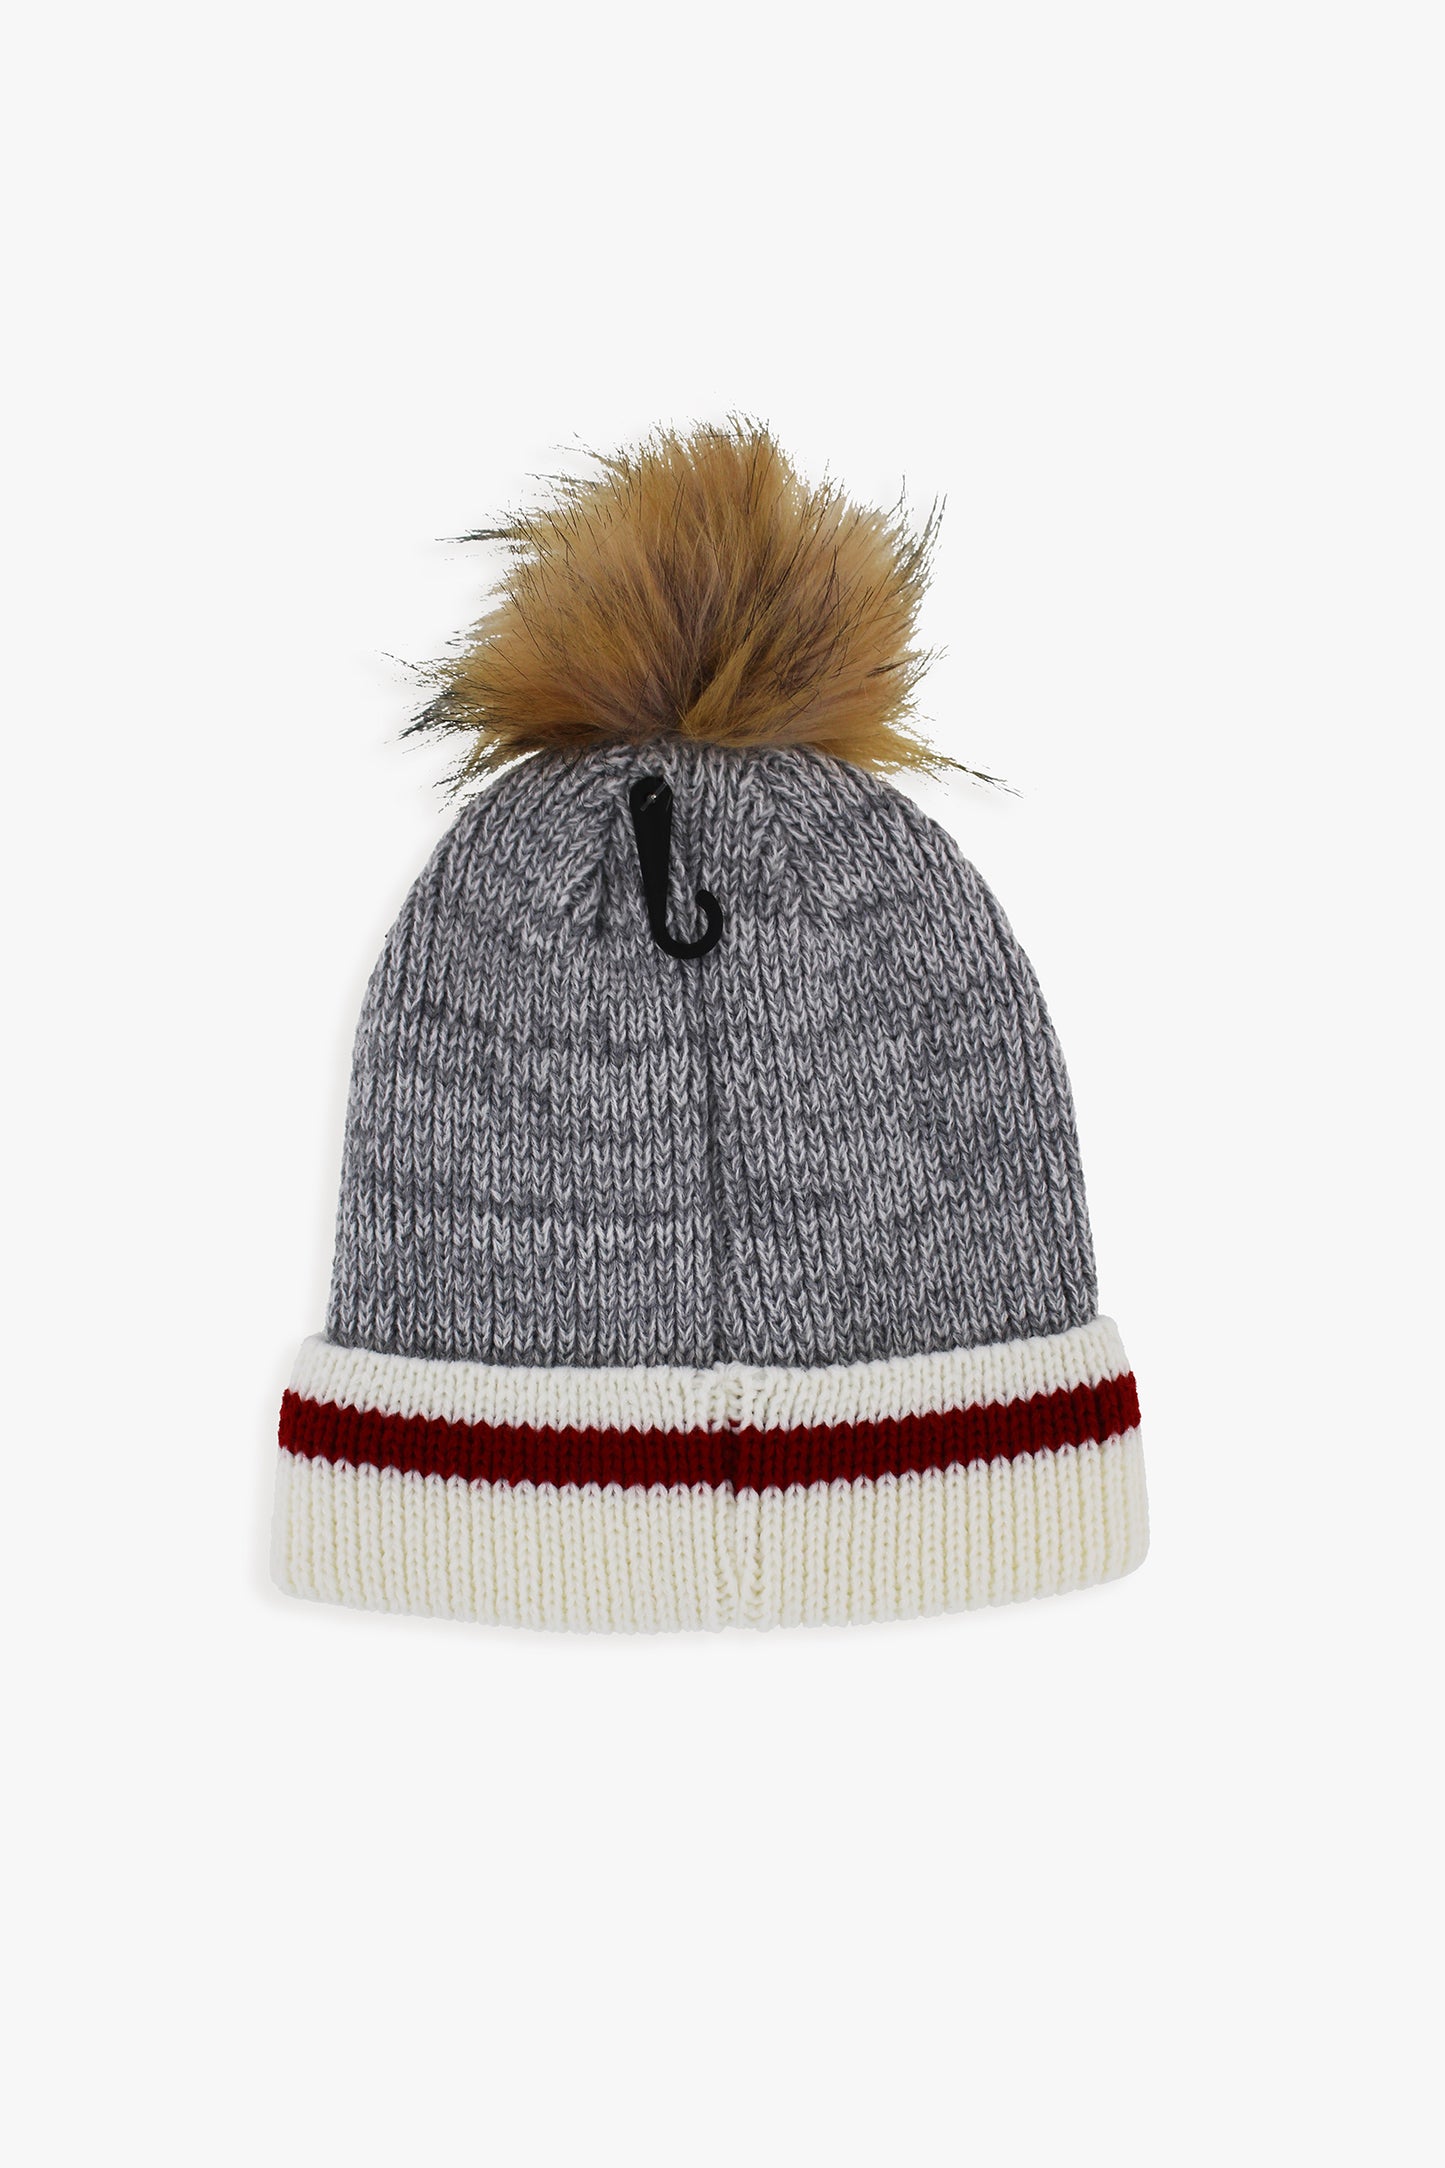 Great Northern Adult Unisex Fleece Lined Toque With Faux Fur Pom